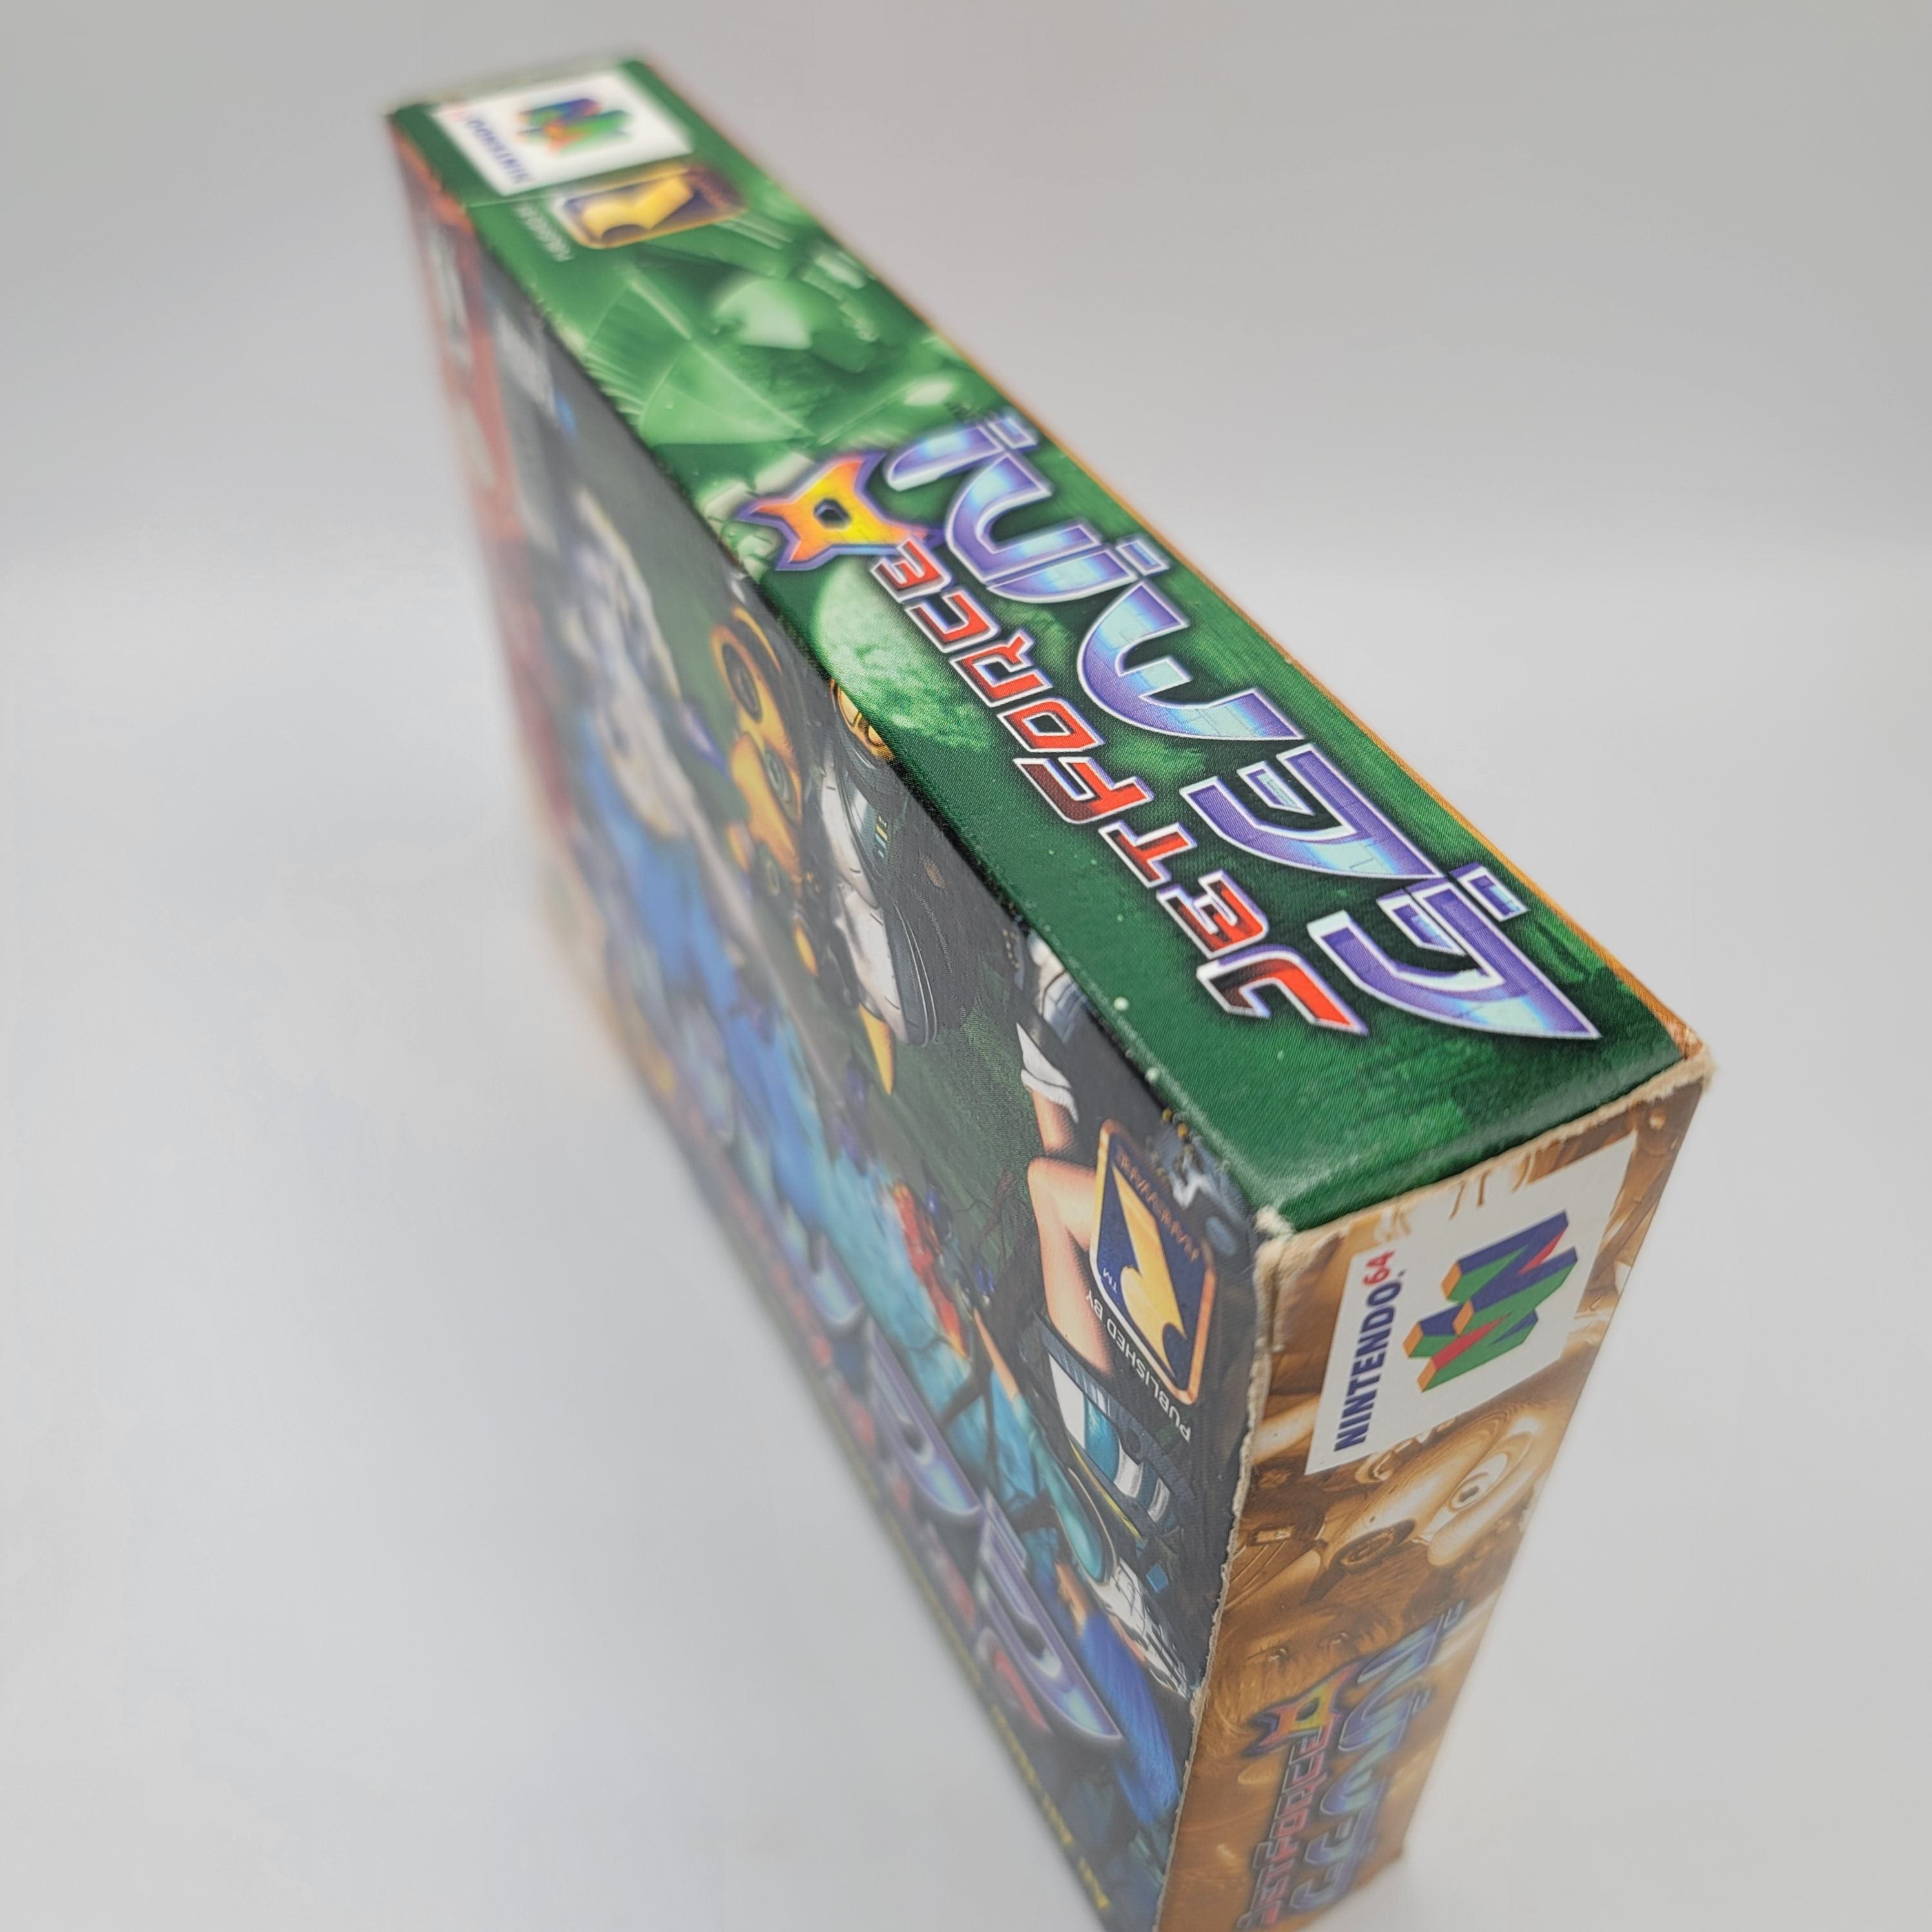 N64 - Jet Force Gemini (Complete in Box / A / With Manual)